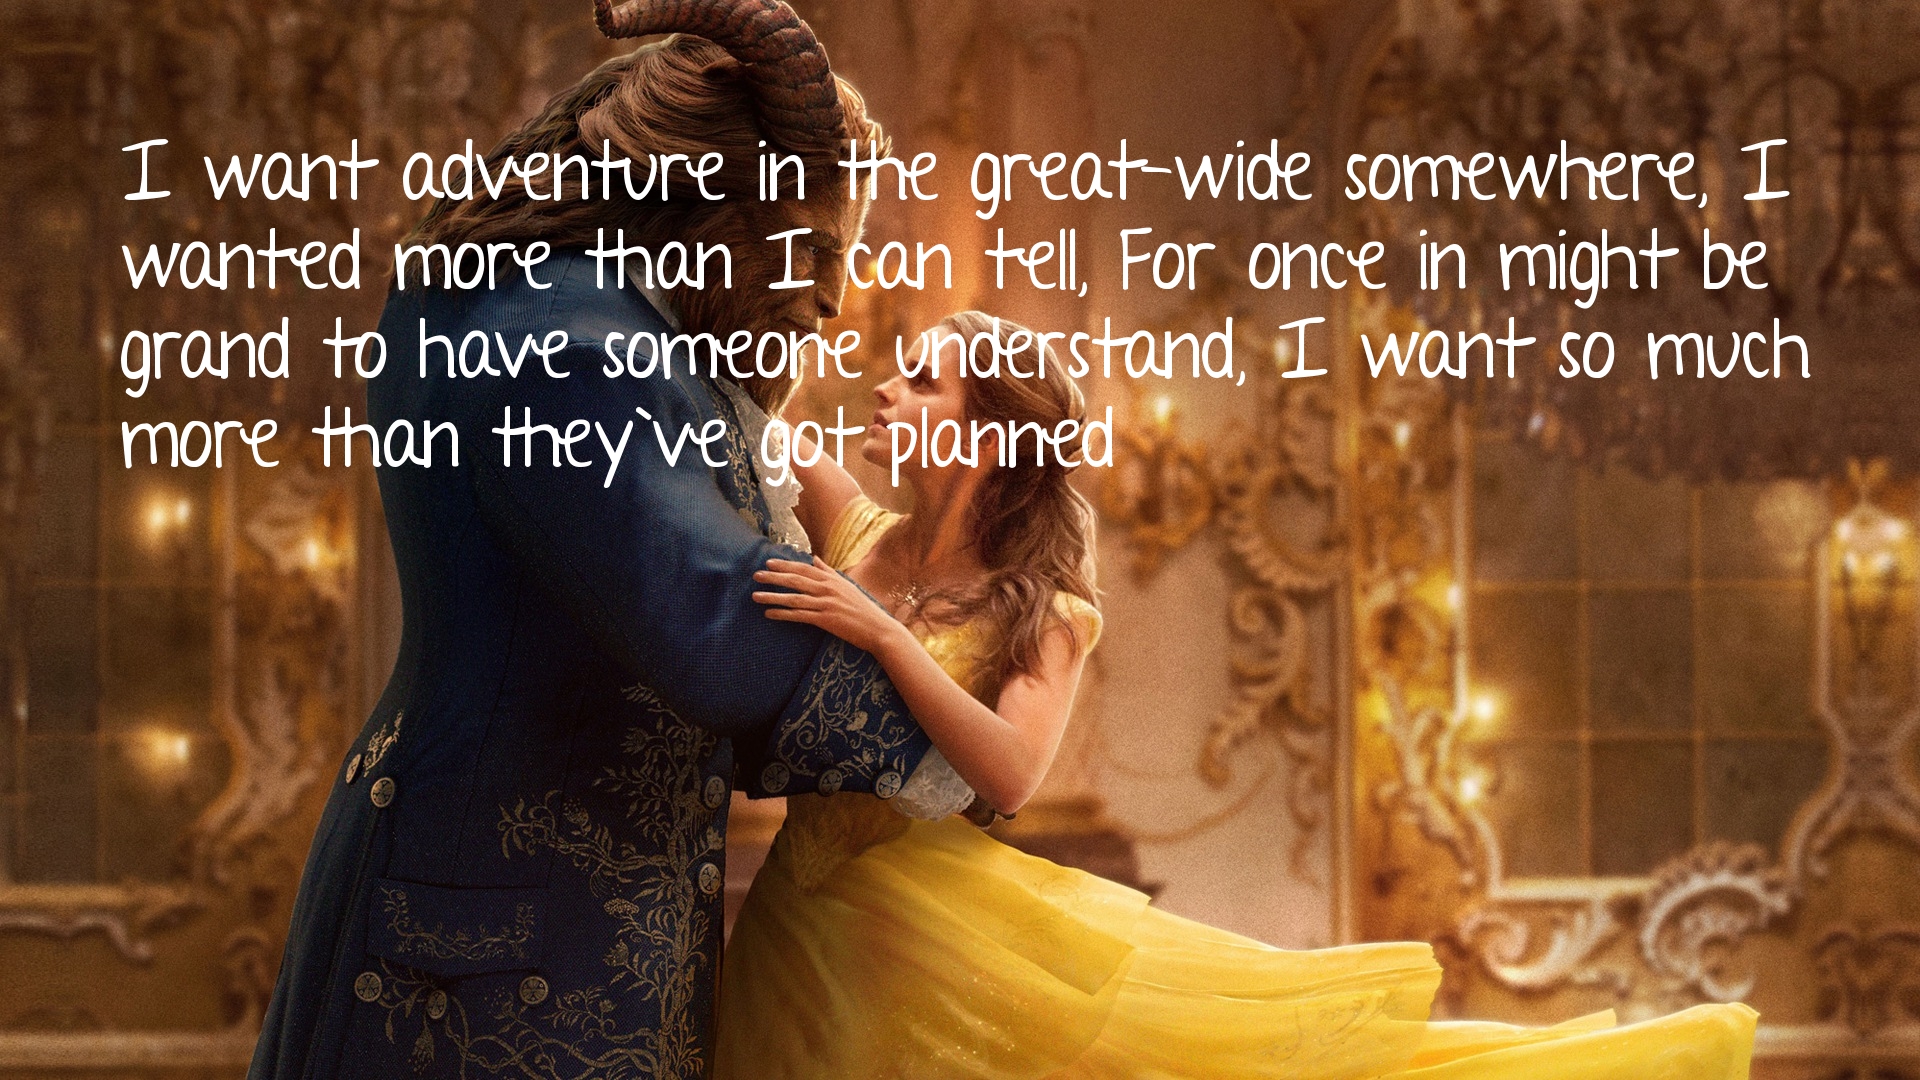 Top 30 Beauty And The Beast Quotes - Word Porn Quotes, Love Quotes